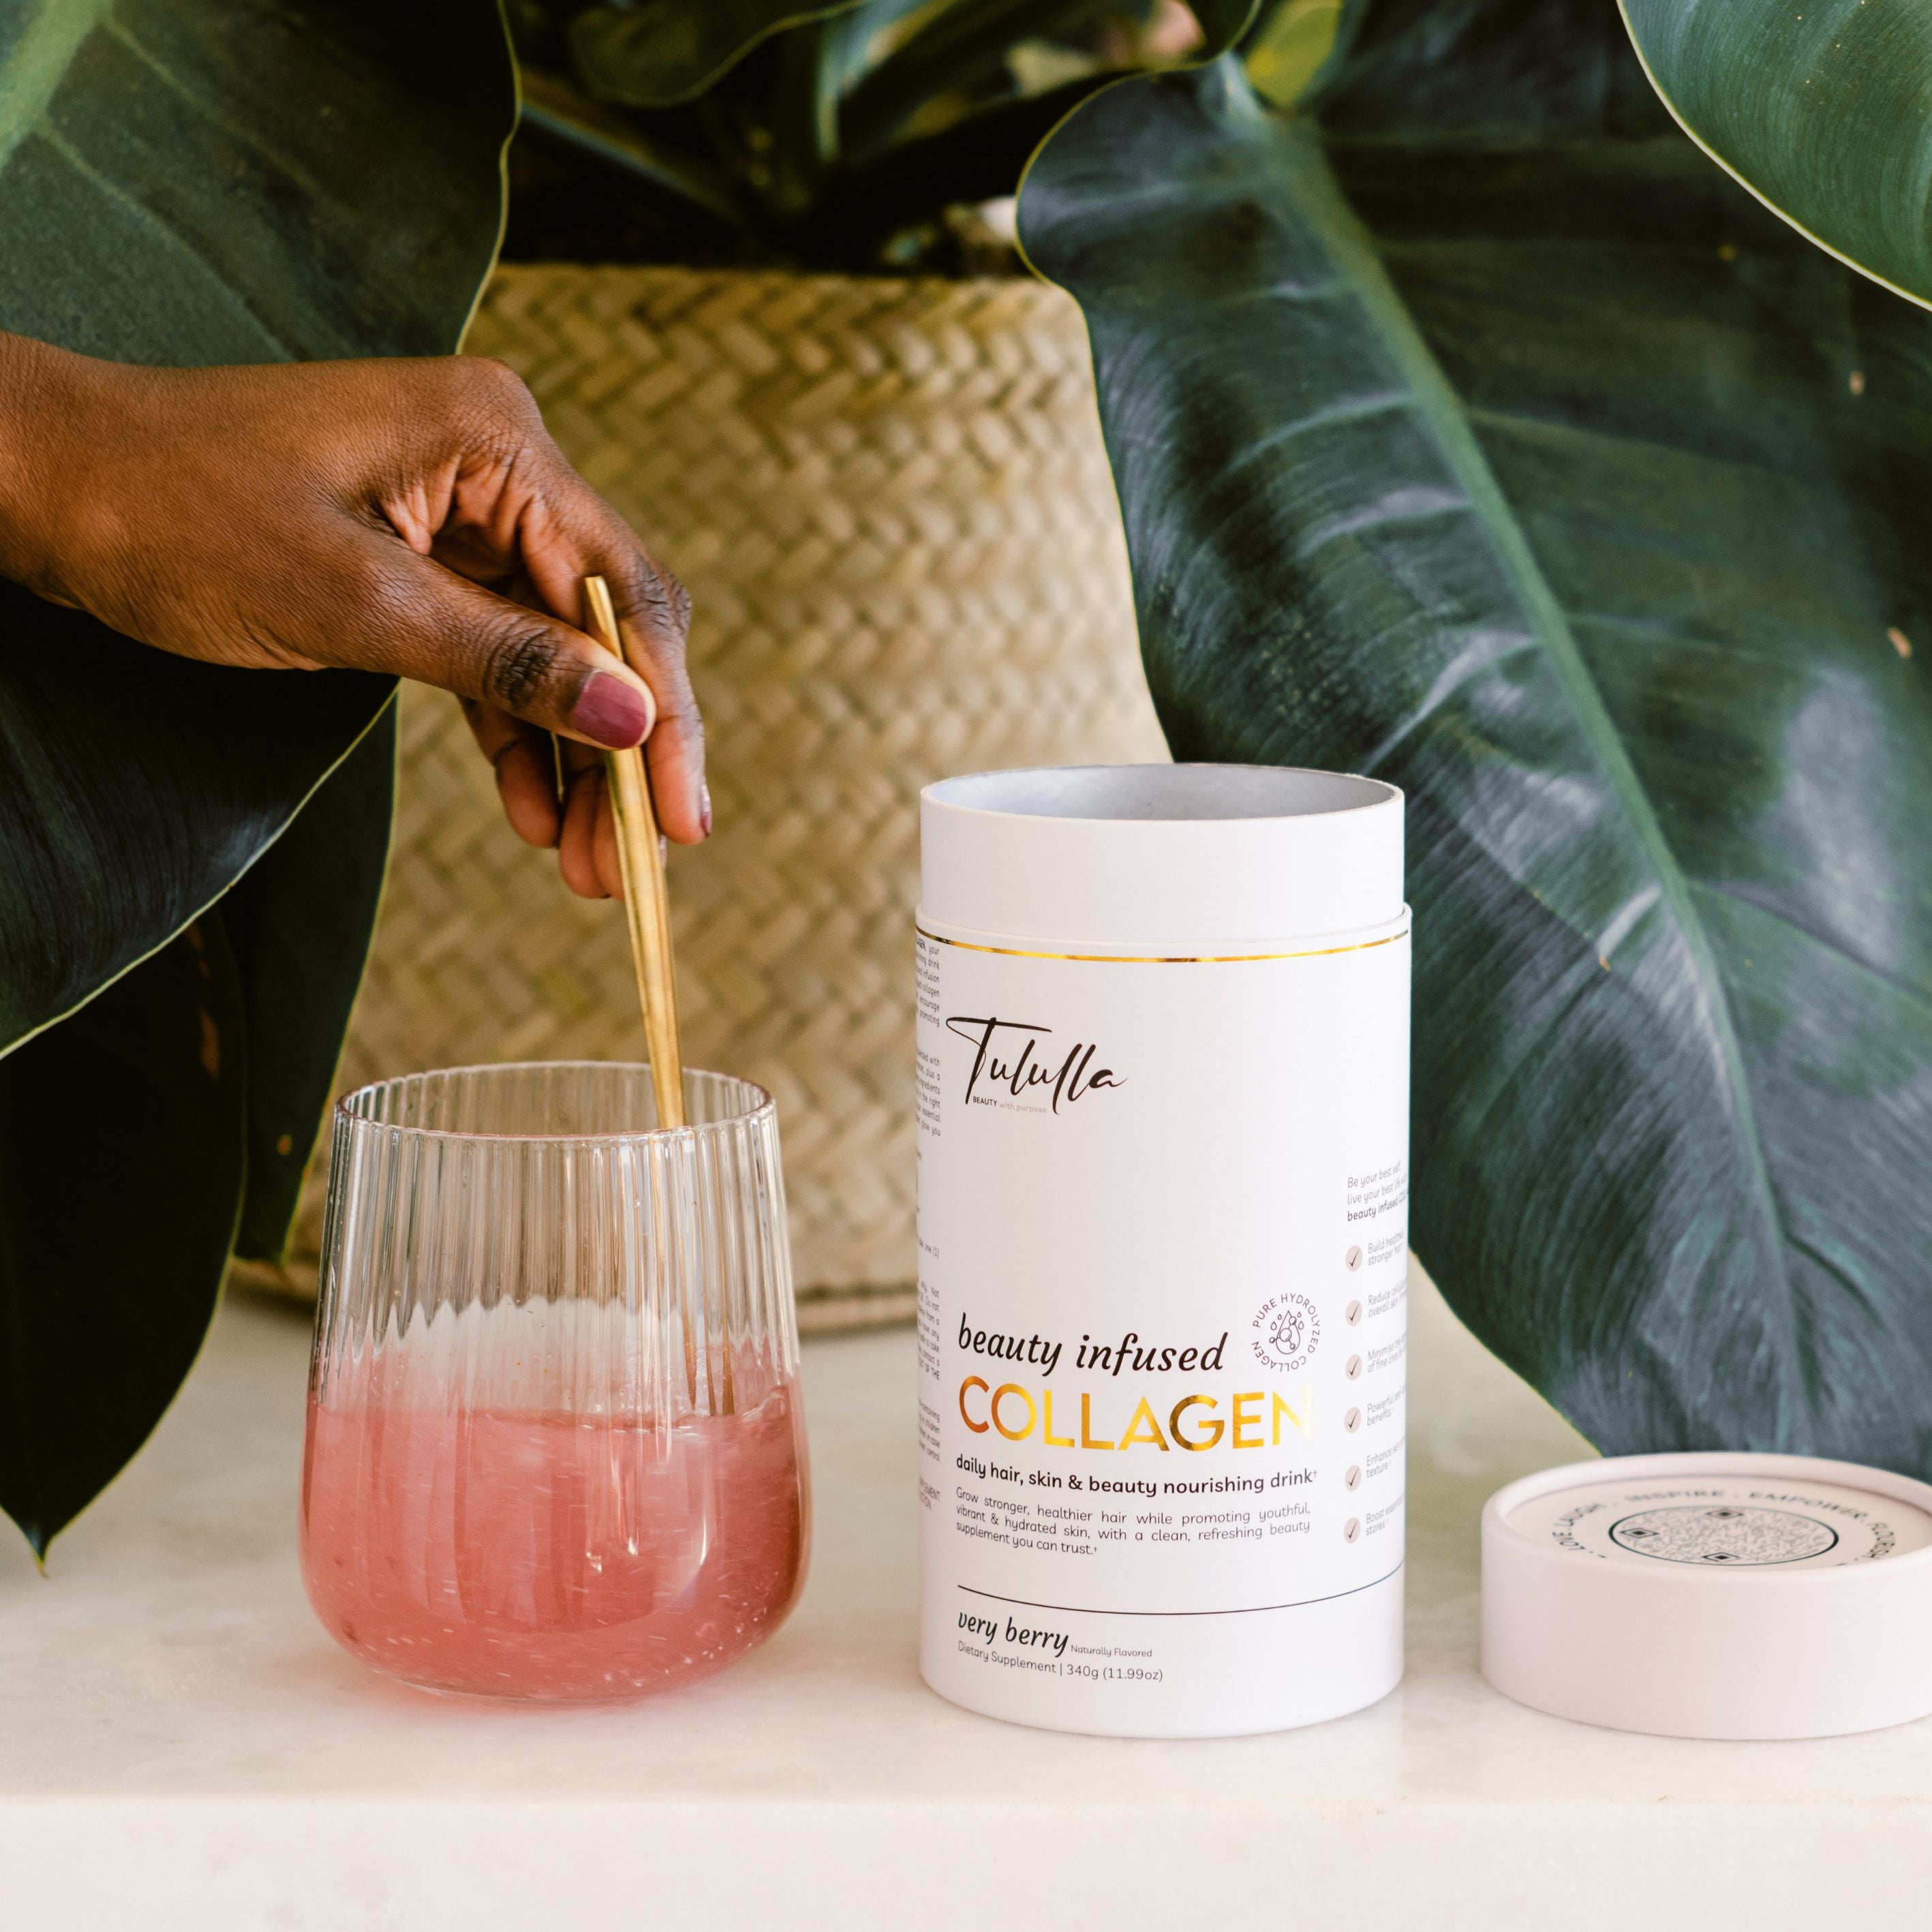 Tululla beauty infused collagen powder